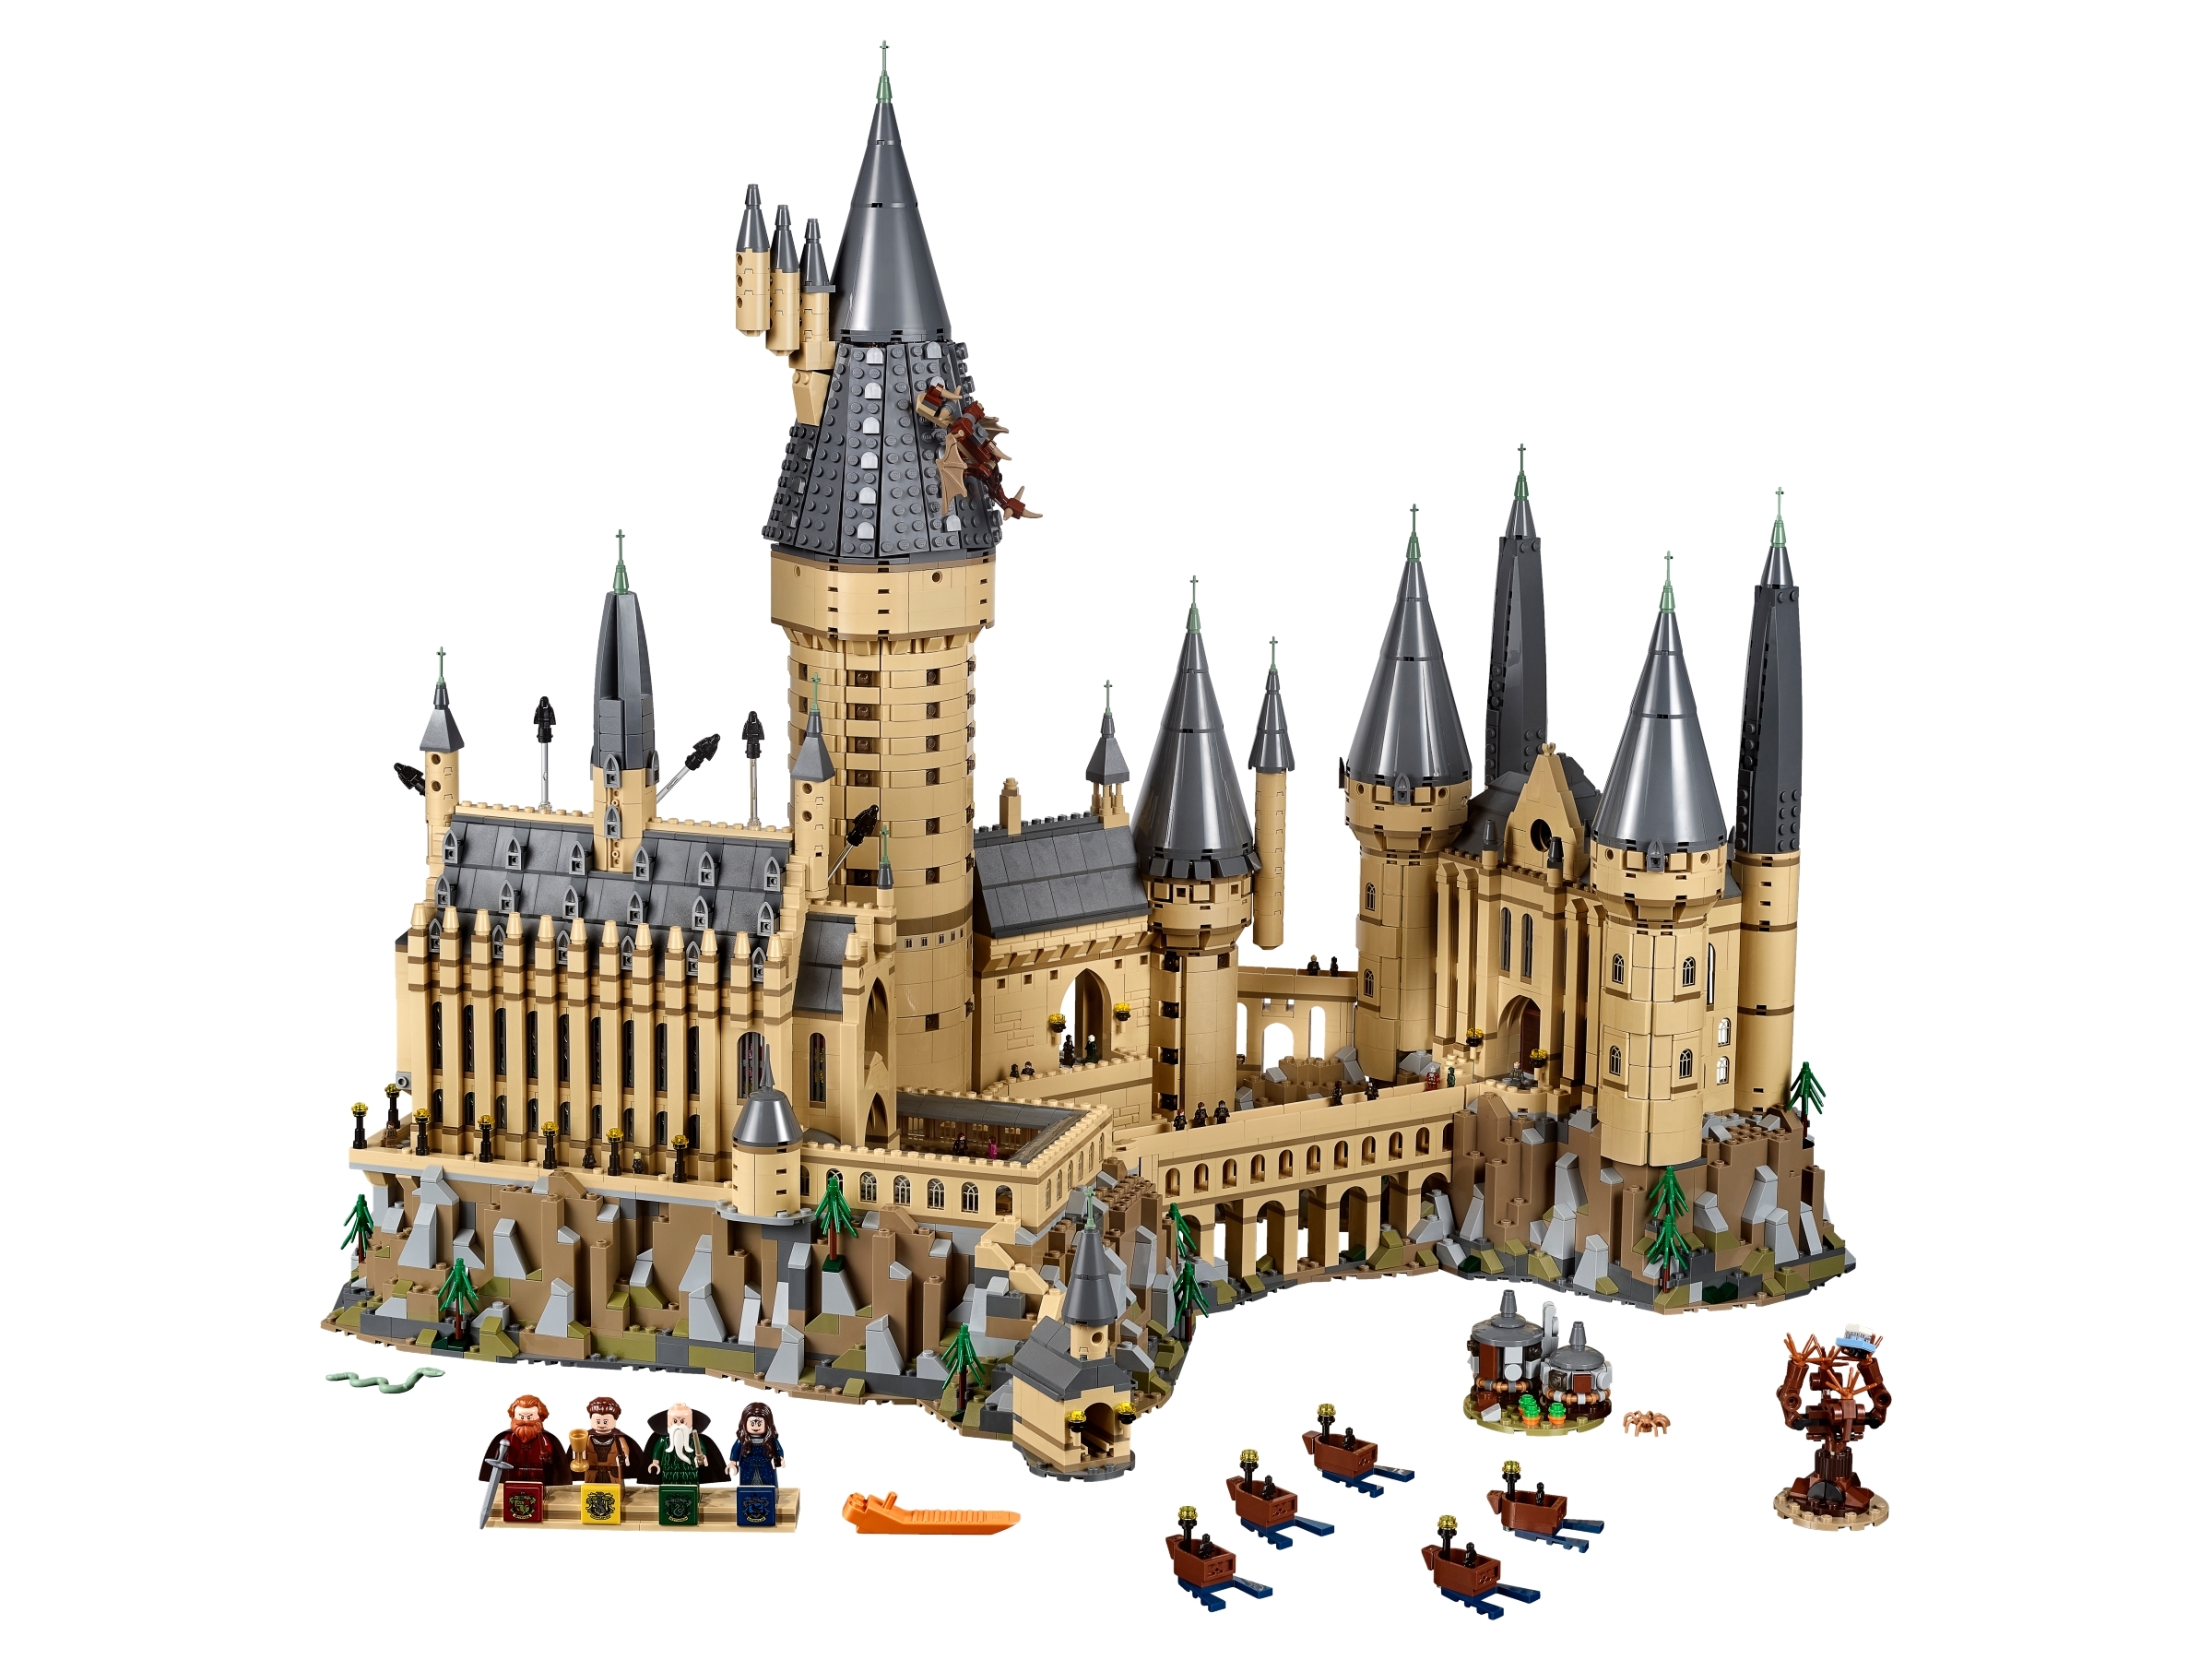 hp190 NEW LEGO Albus Dumbledore  FROM SET 75948 HARRY POTTER 